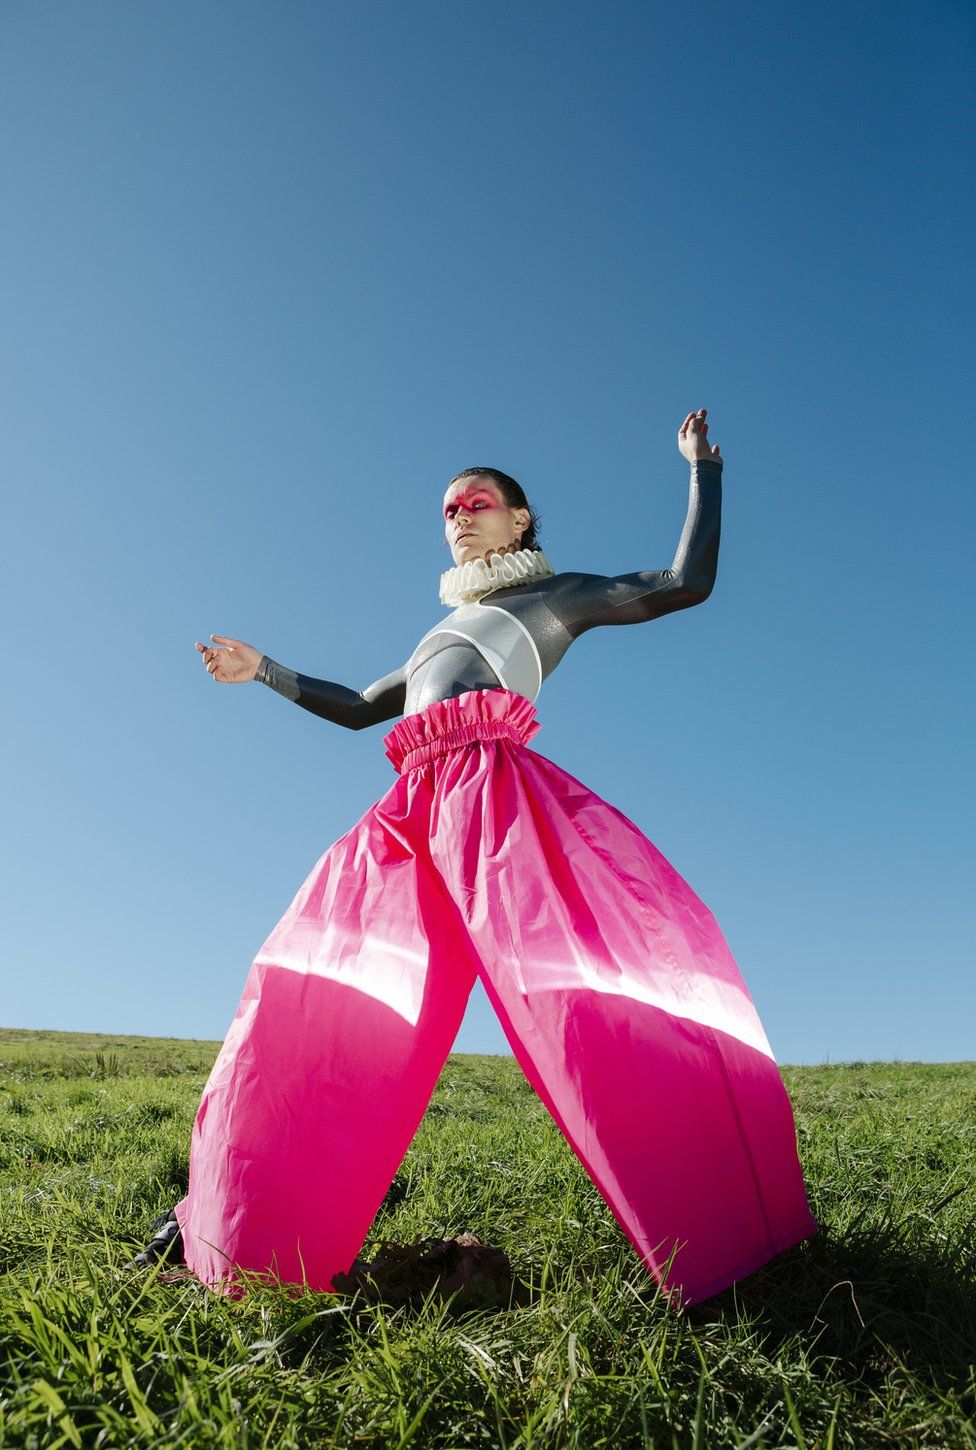 A fashion model poses with large pink trousers